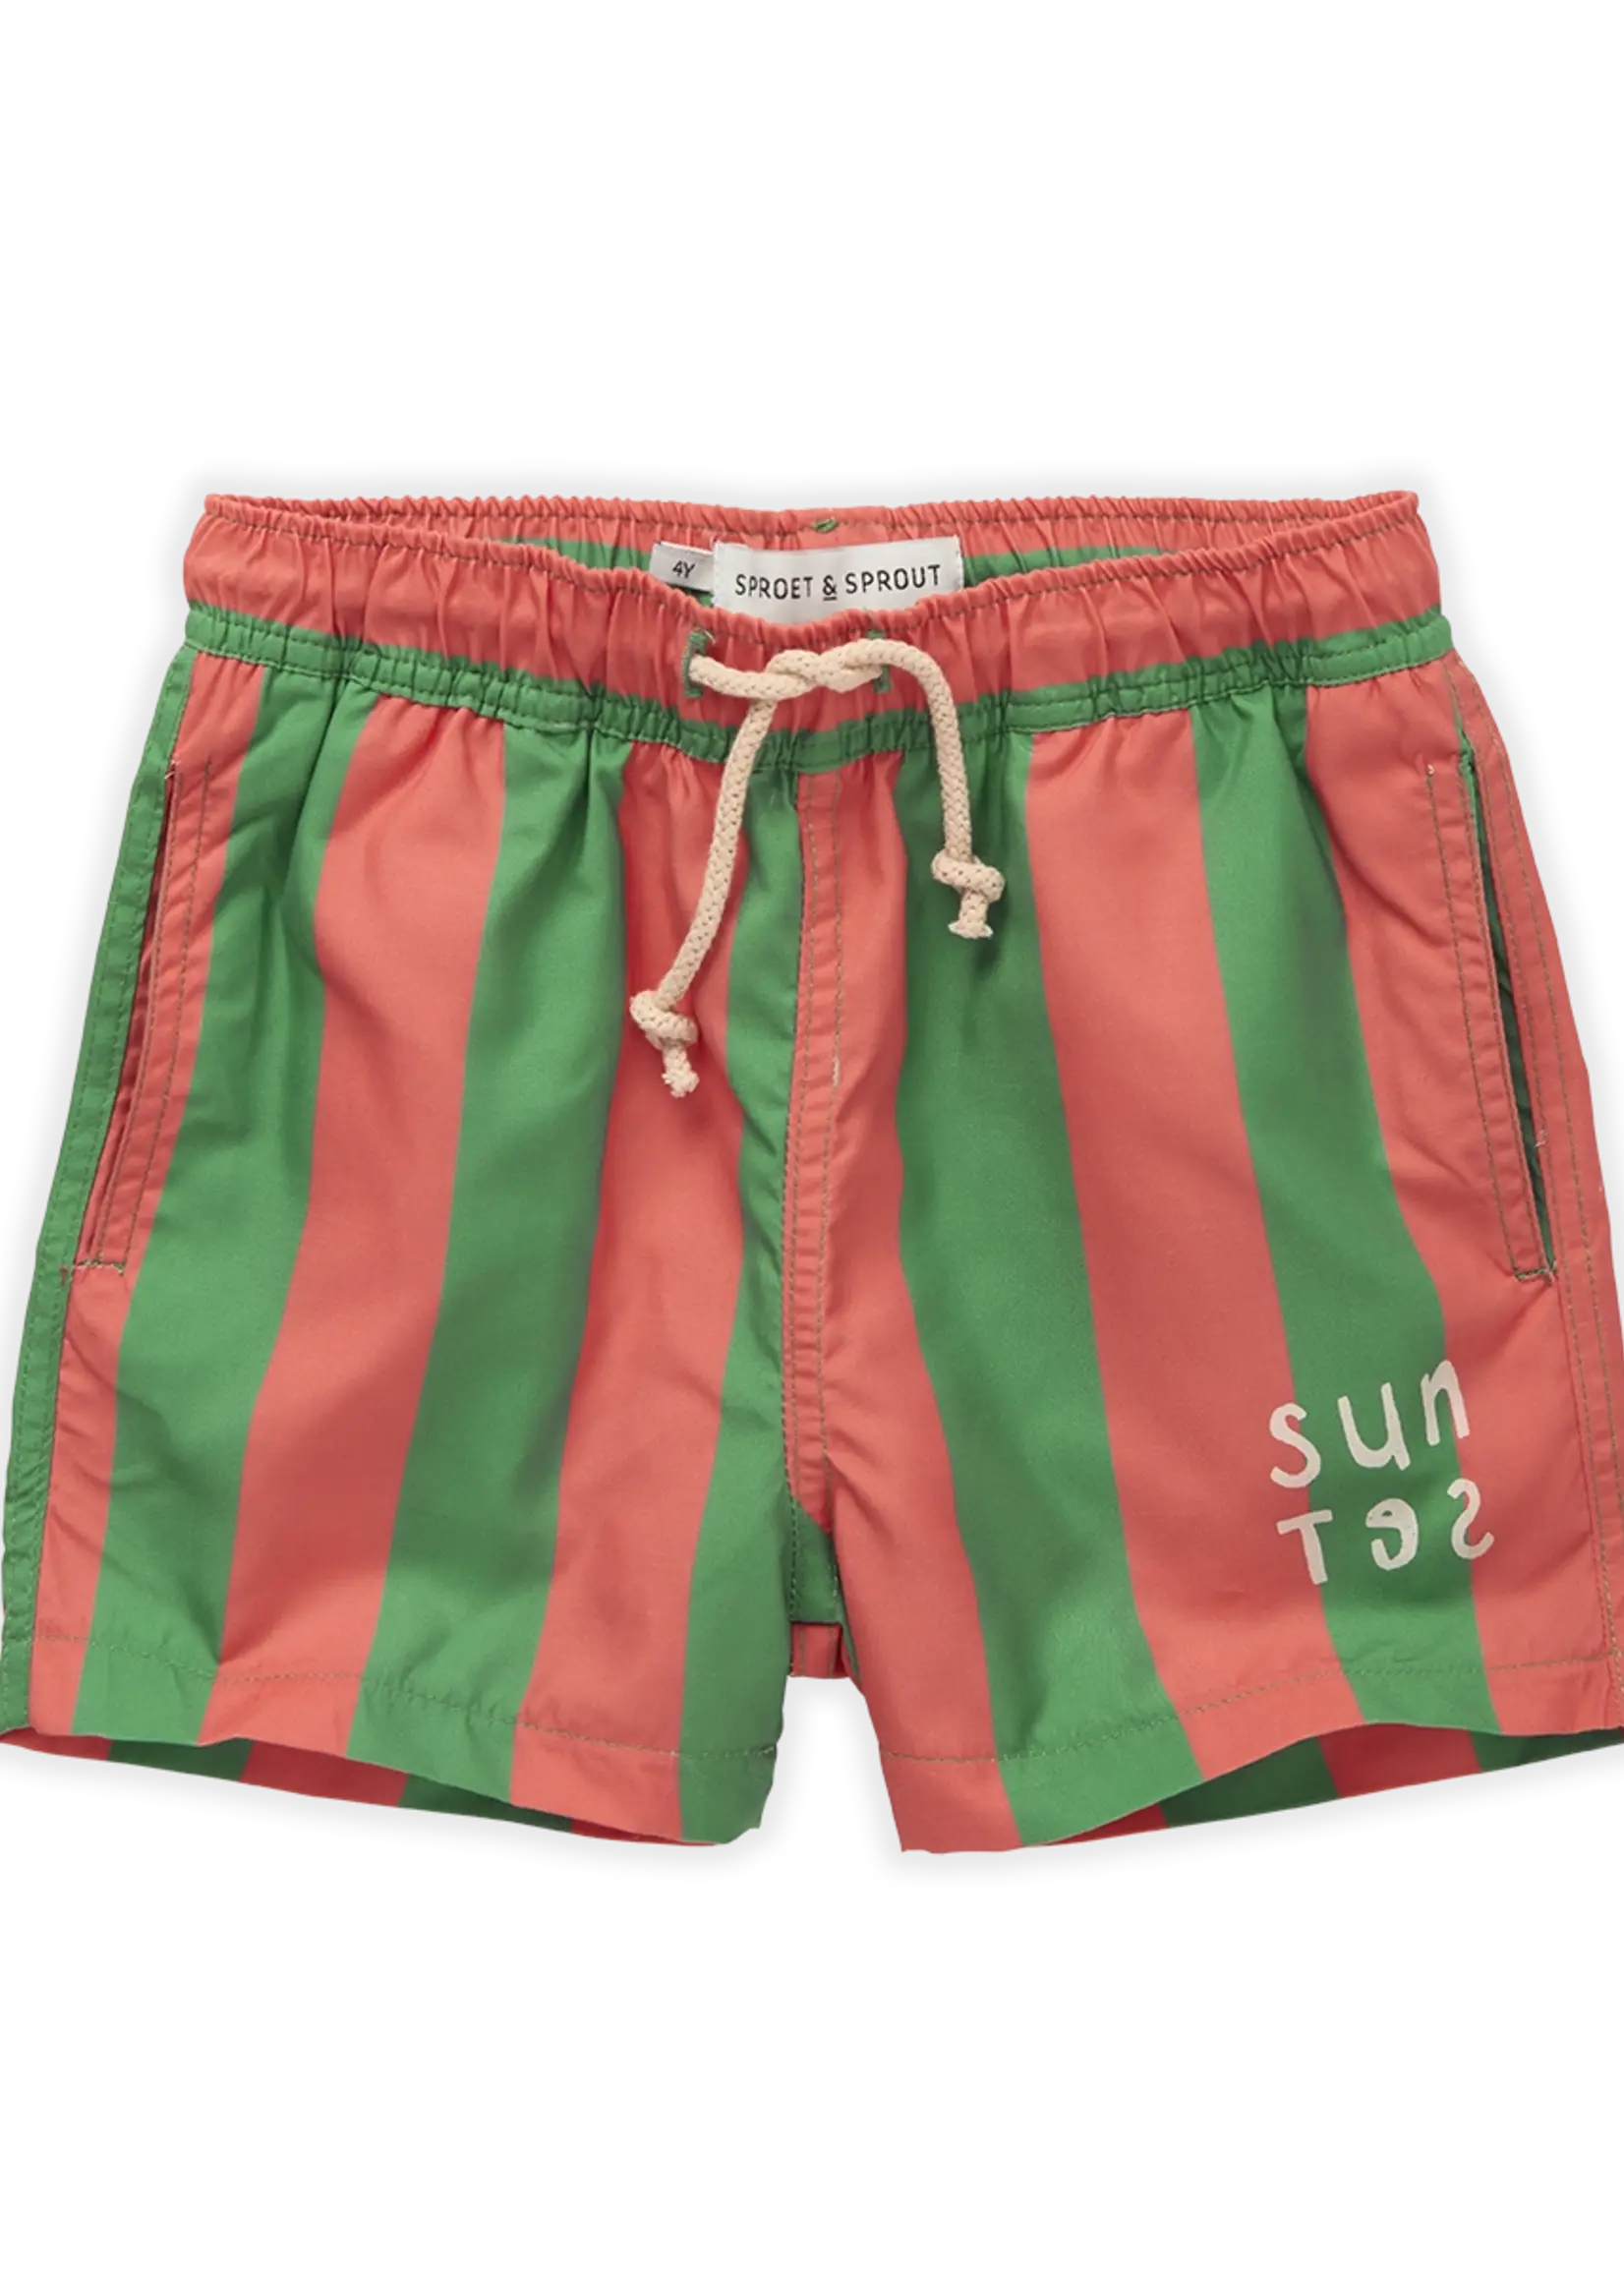 Sproet & Sprout Woven swim short Sunset. Coral